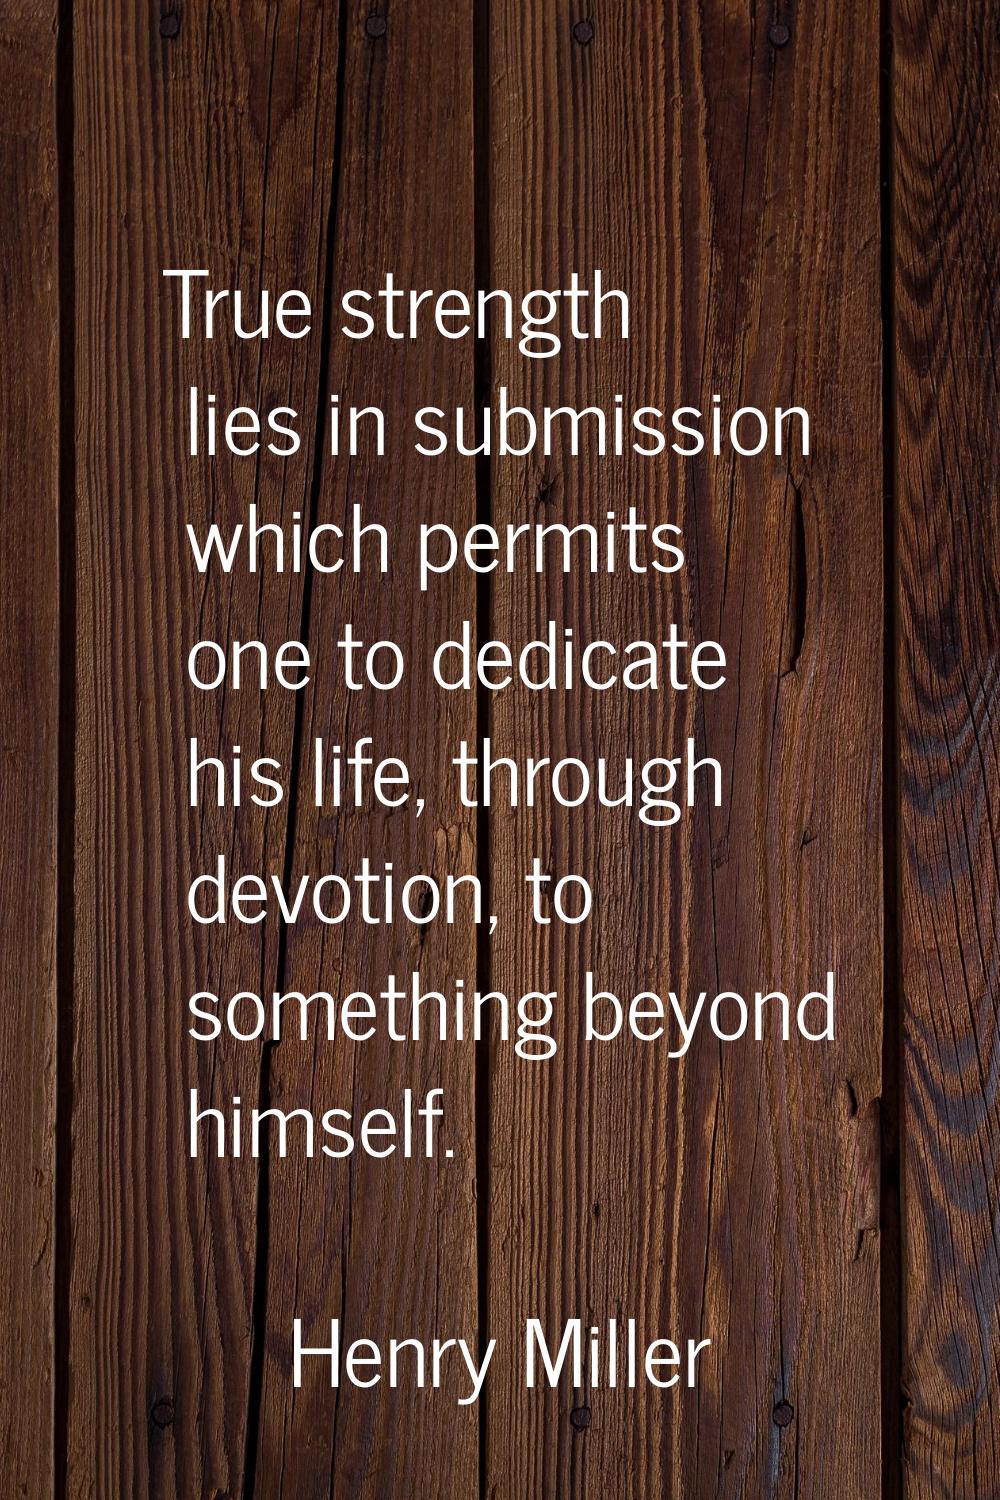 True strength lies in submission which permits one to dedicate his life, through devotion, to somet